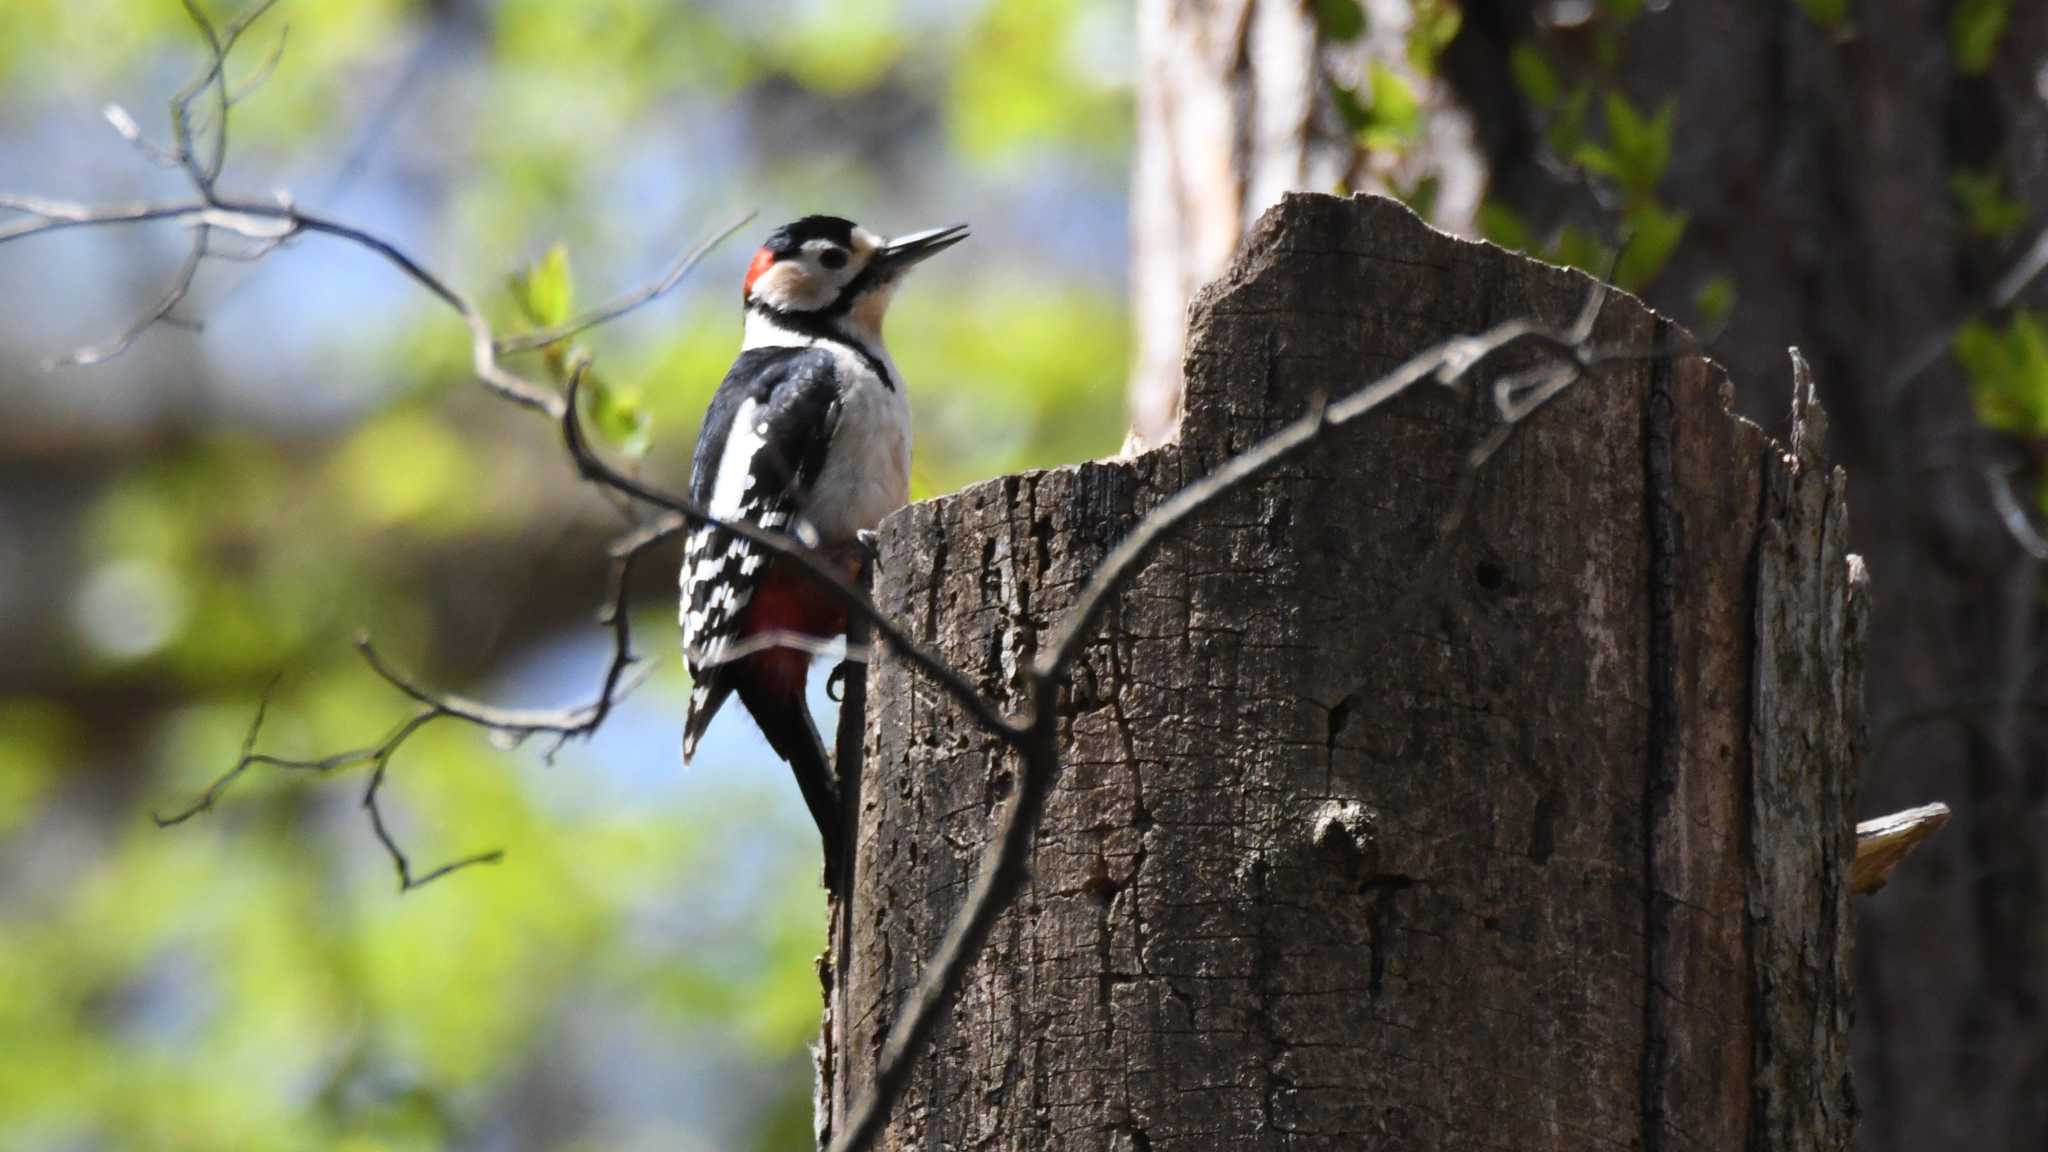 Photo of Great Spotted Woodpecker at Karuizawa wild bird forest by ao1000